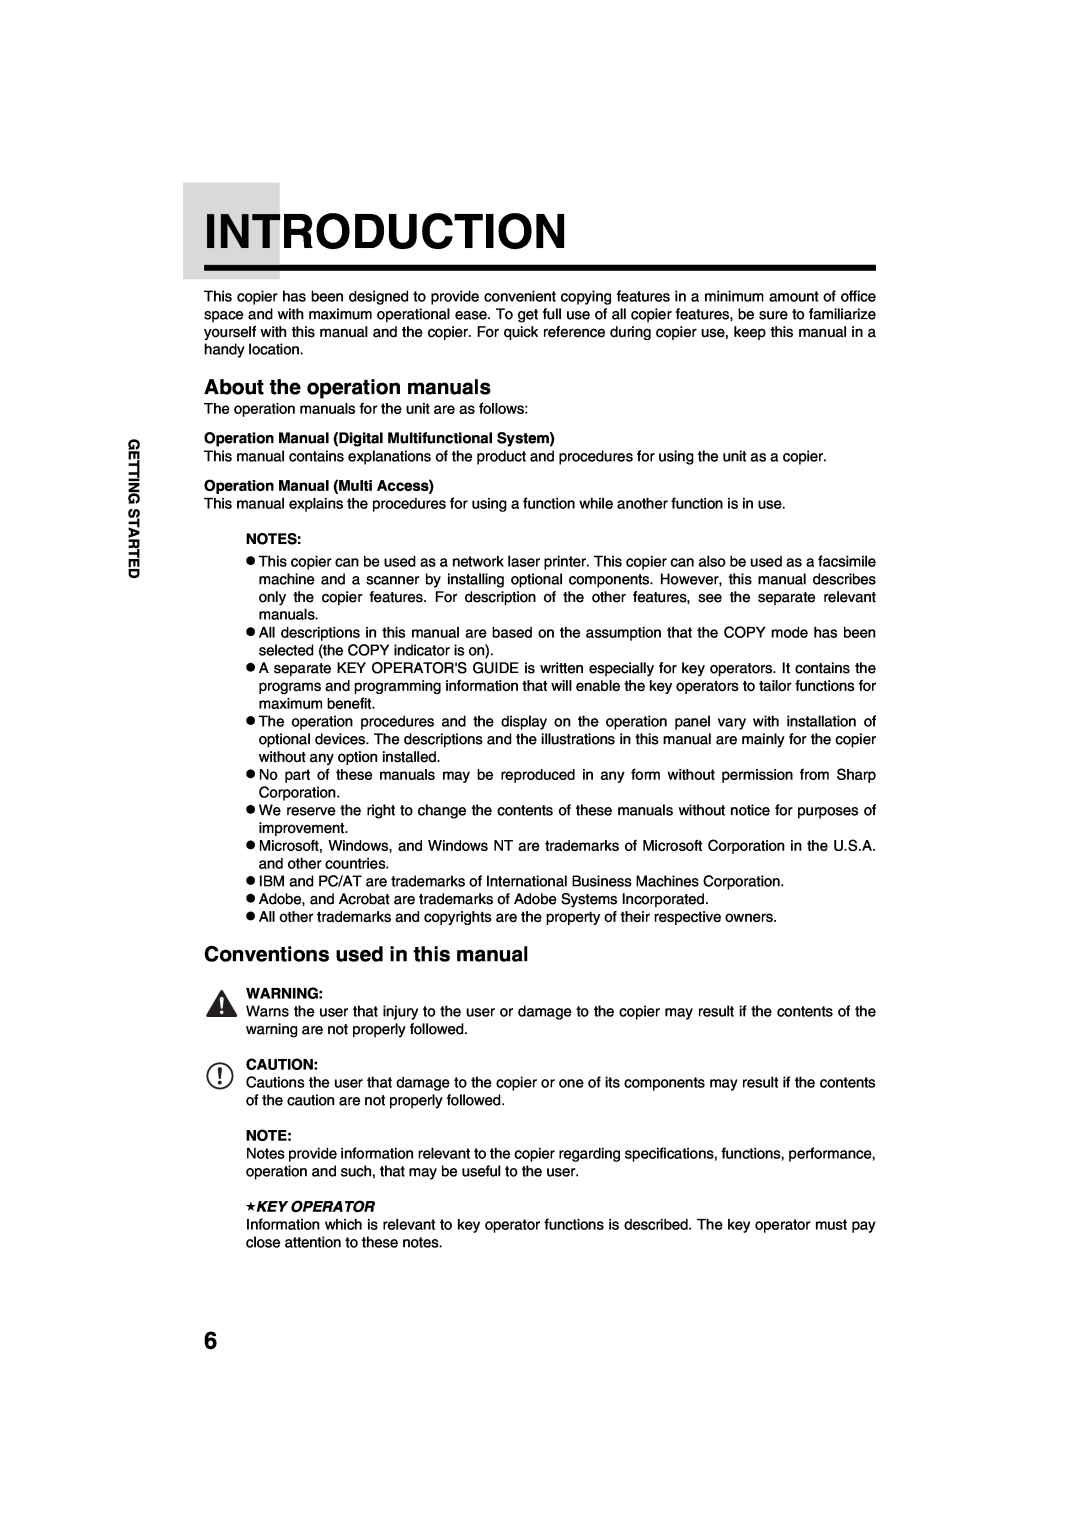 Sharp AR-M208 Introduction, About the operation manuals, Conventions used in this manual, Key Operator 